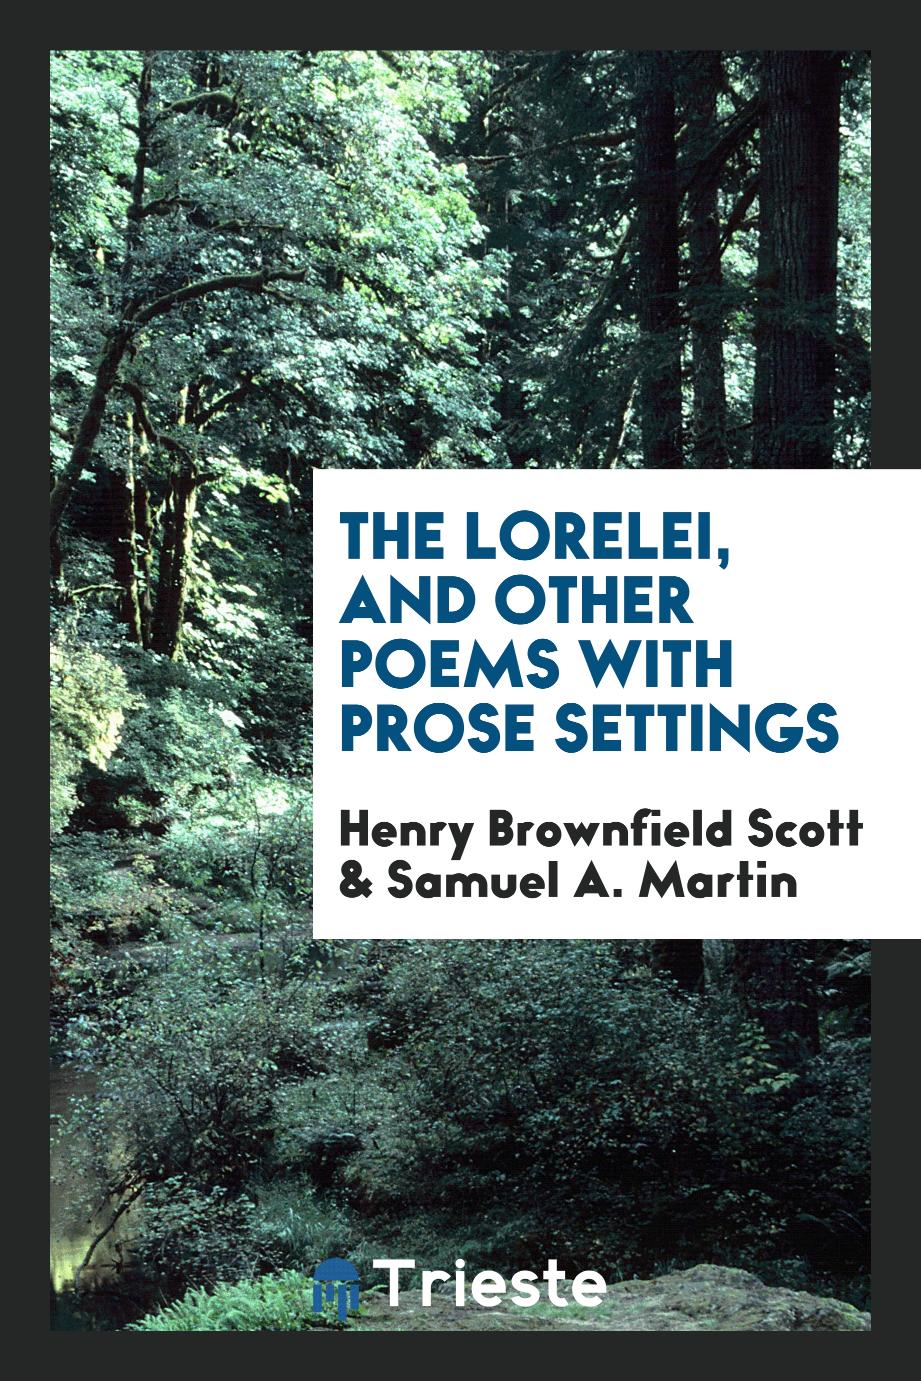 The Lorelei, and Other Poems with Prose Settings